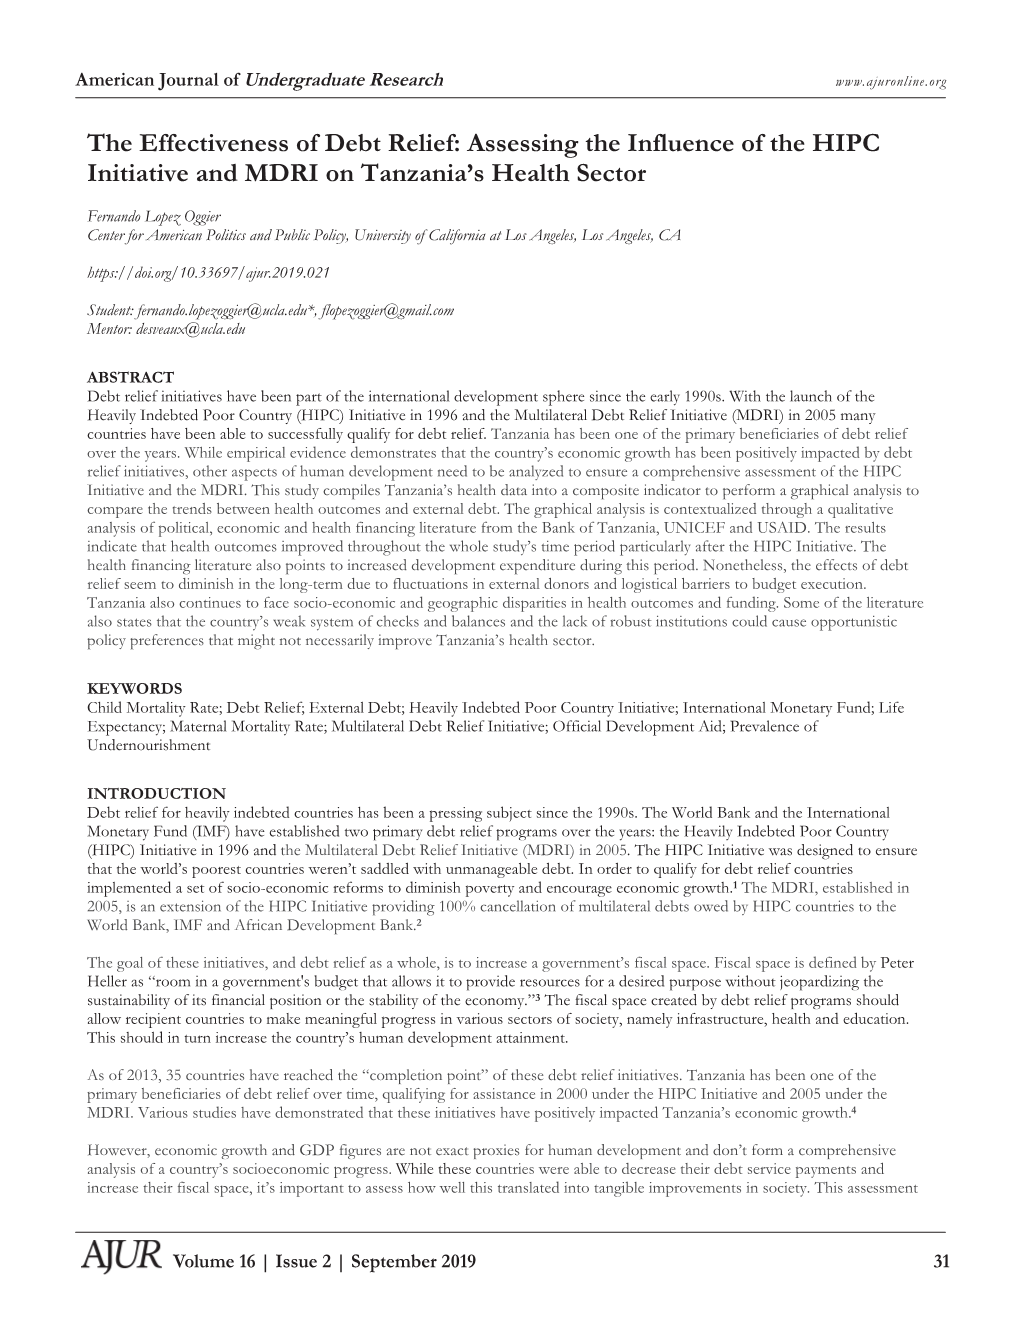 The Effectiveness of Debt Relief: Assessing the Influence of the HIPC Initiative and MDRI on Tanzania's Health Sector